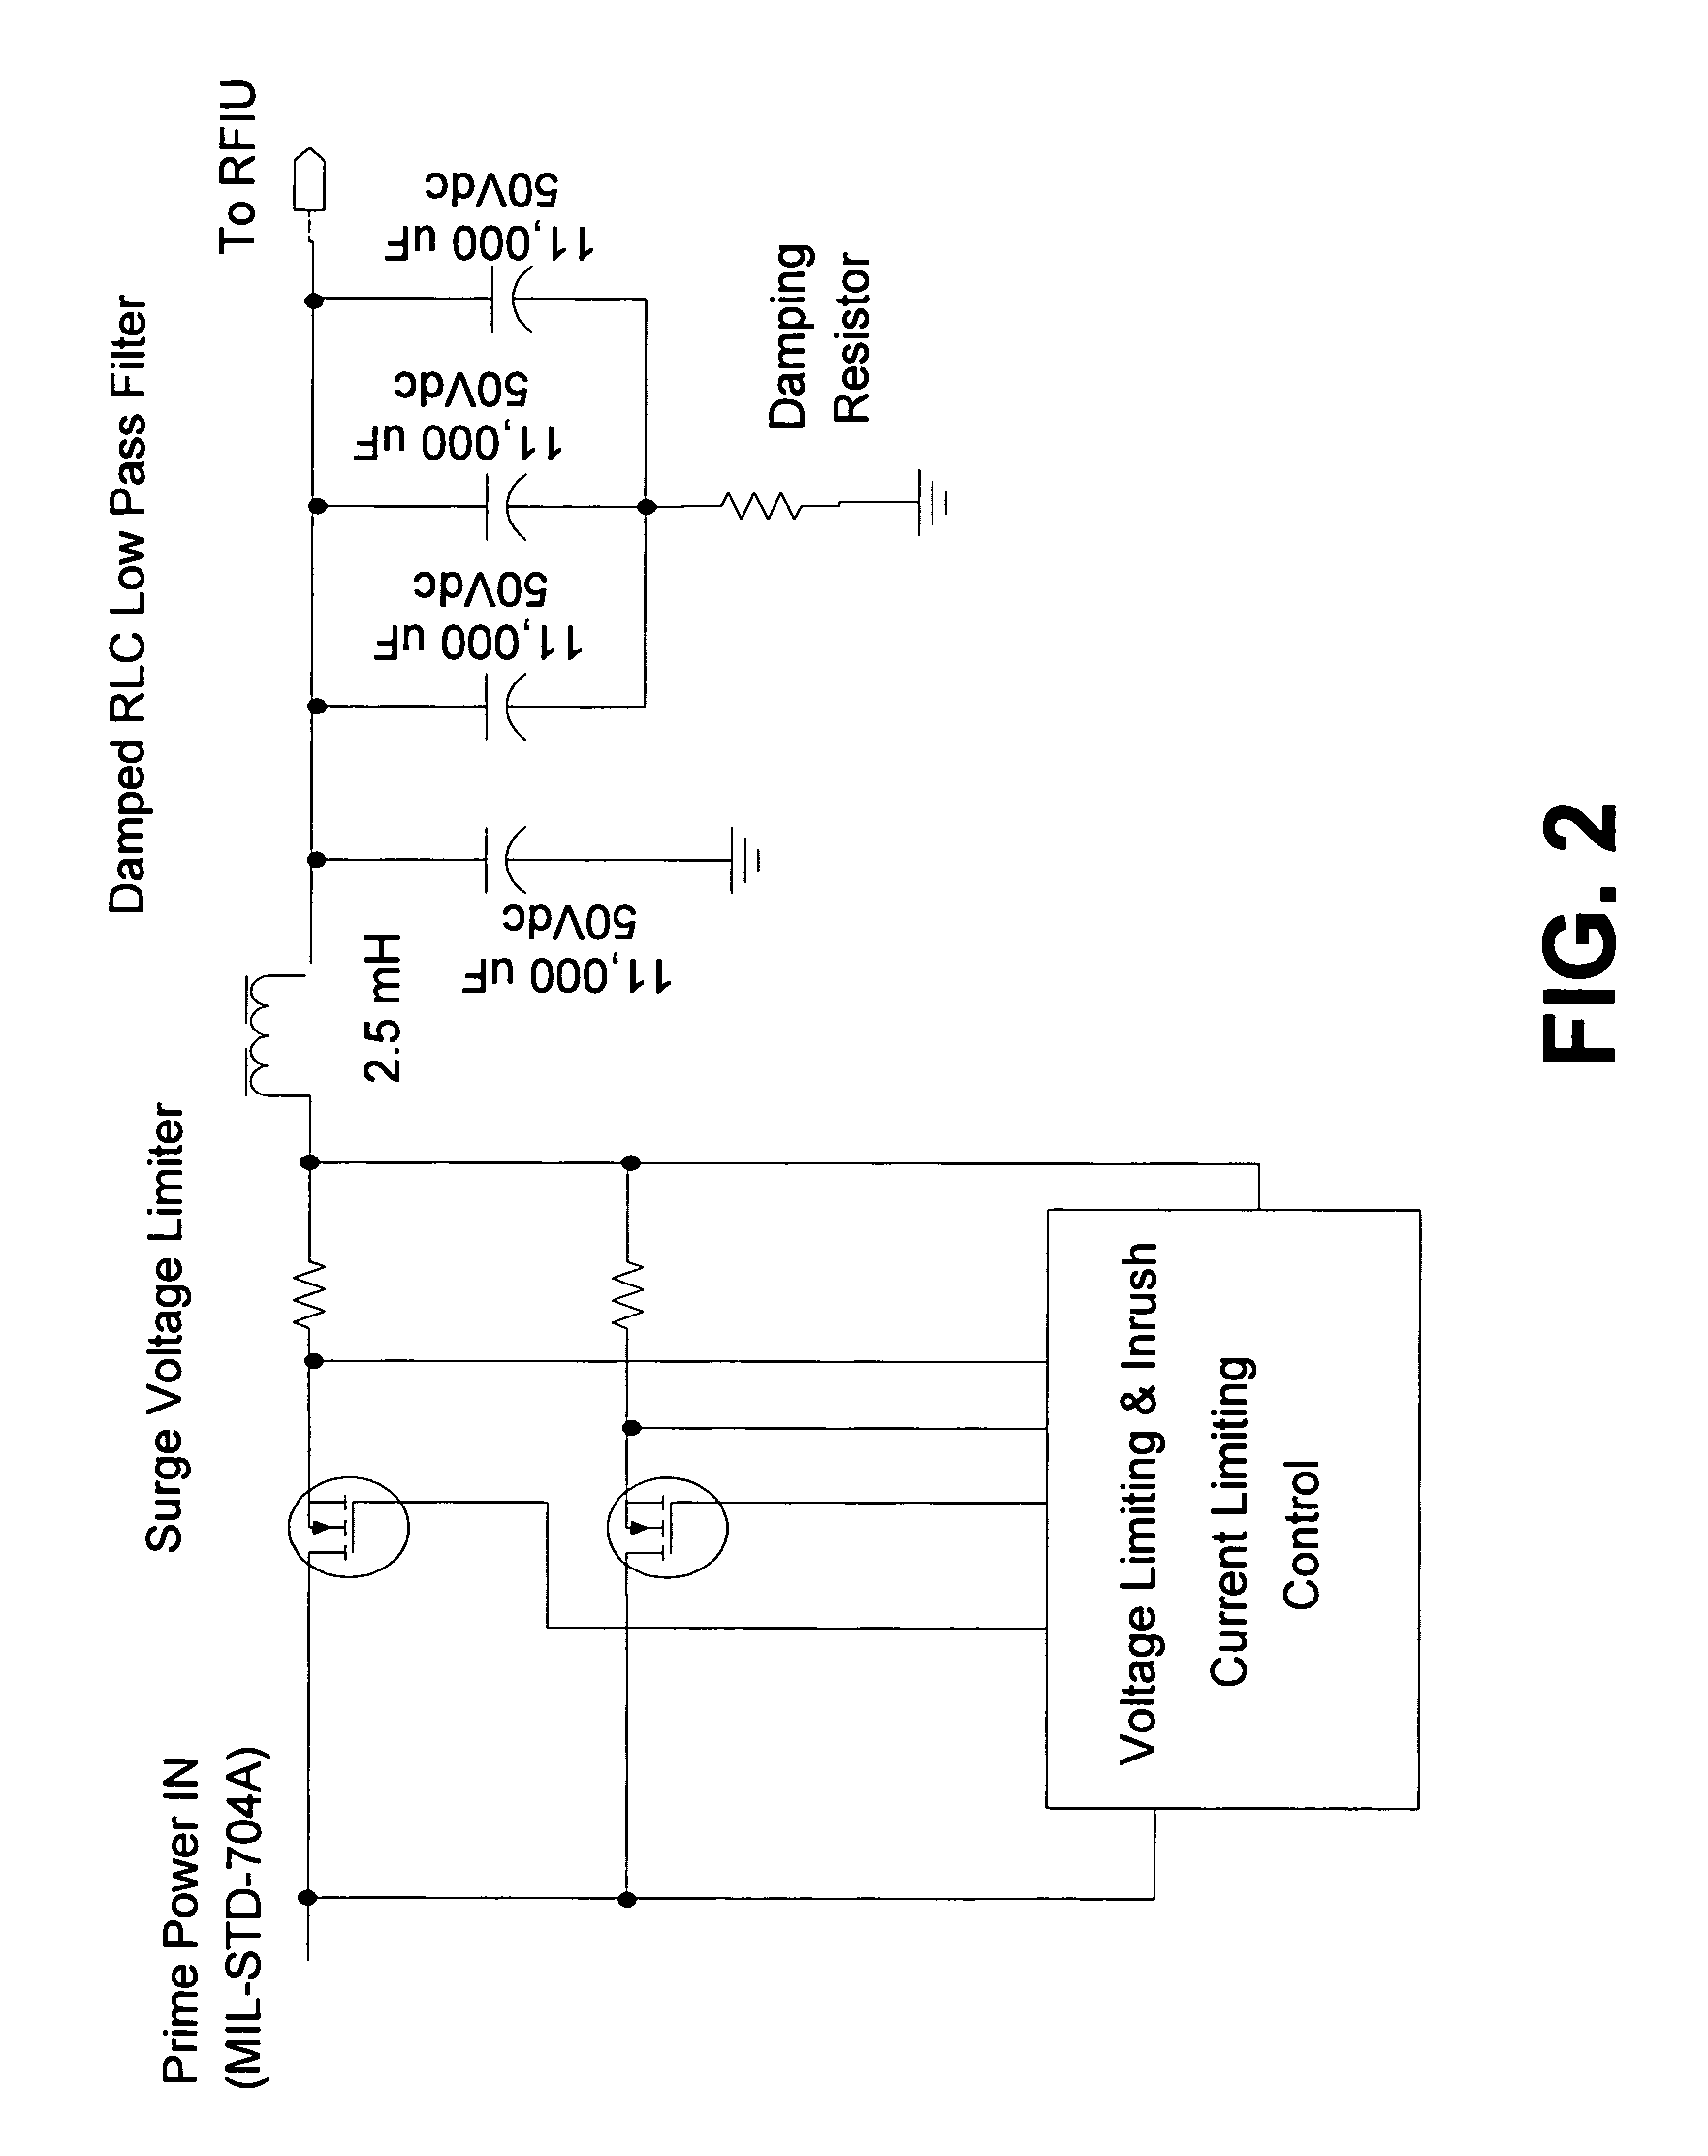 Low-frequency power line emissions reduction system and method